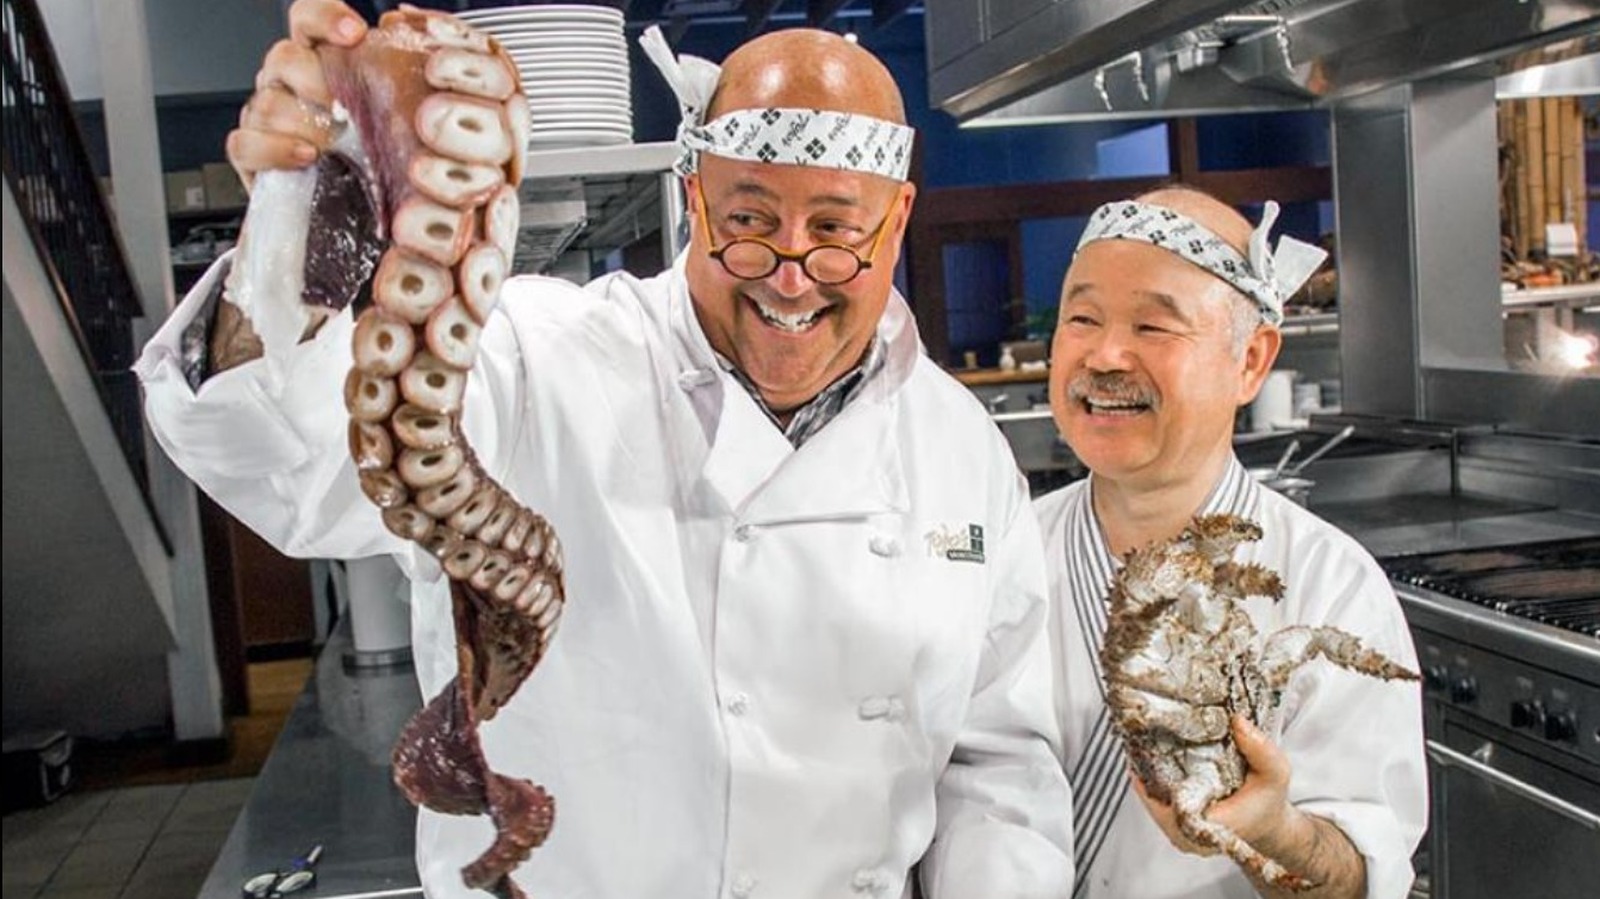 Andrew Zimmern Reveals What Bizarre Foods Was Really Like Behind The Scenes Exclusive